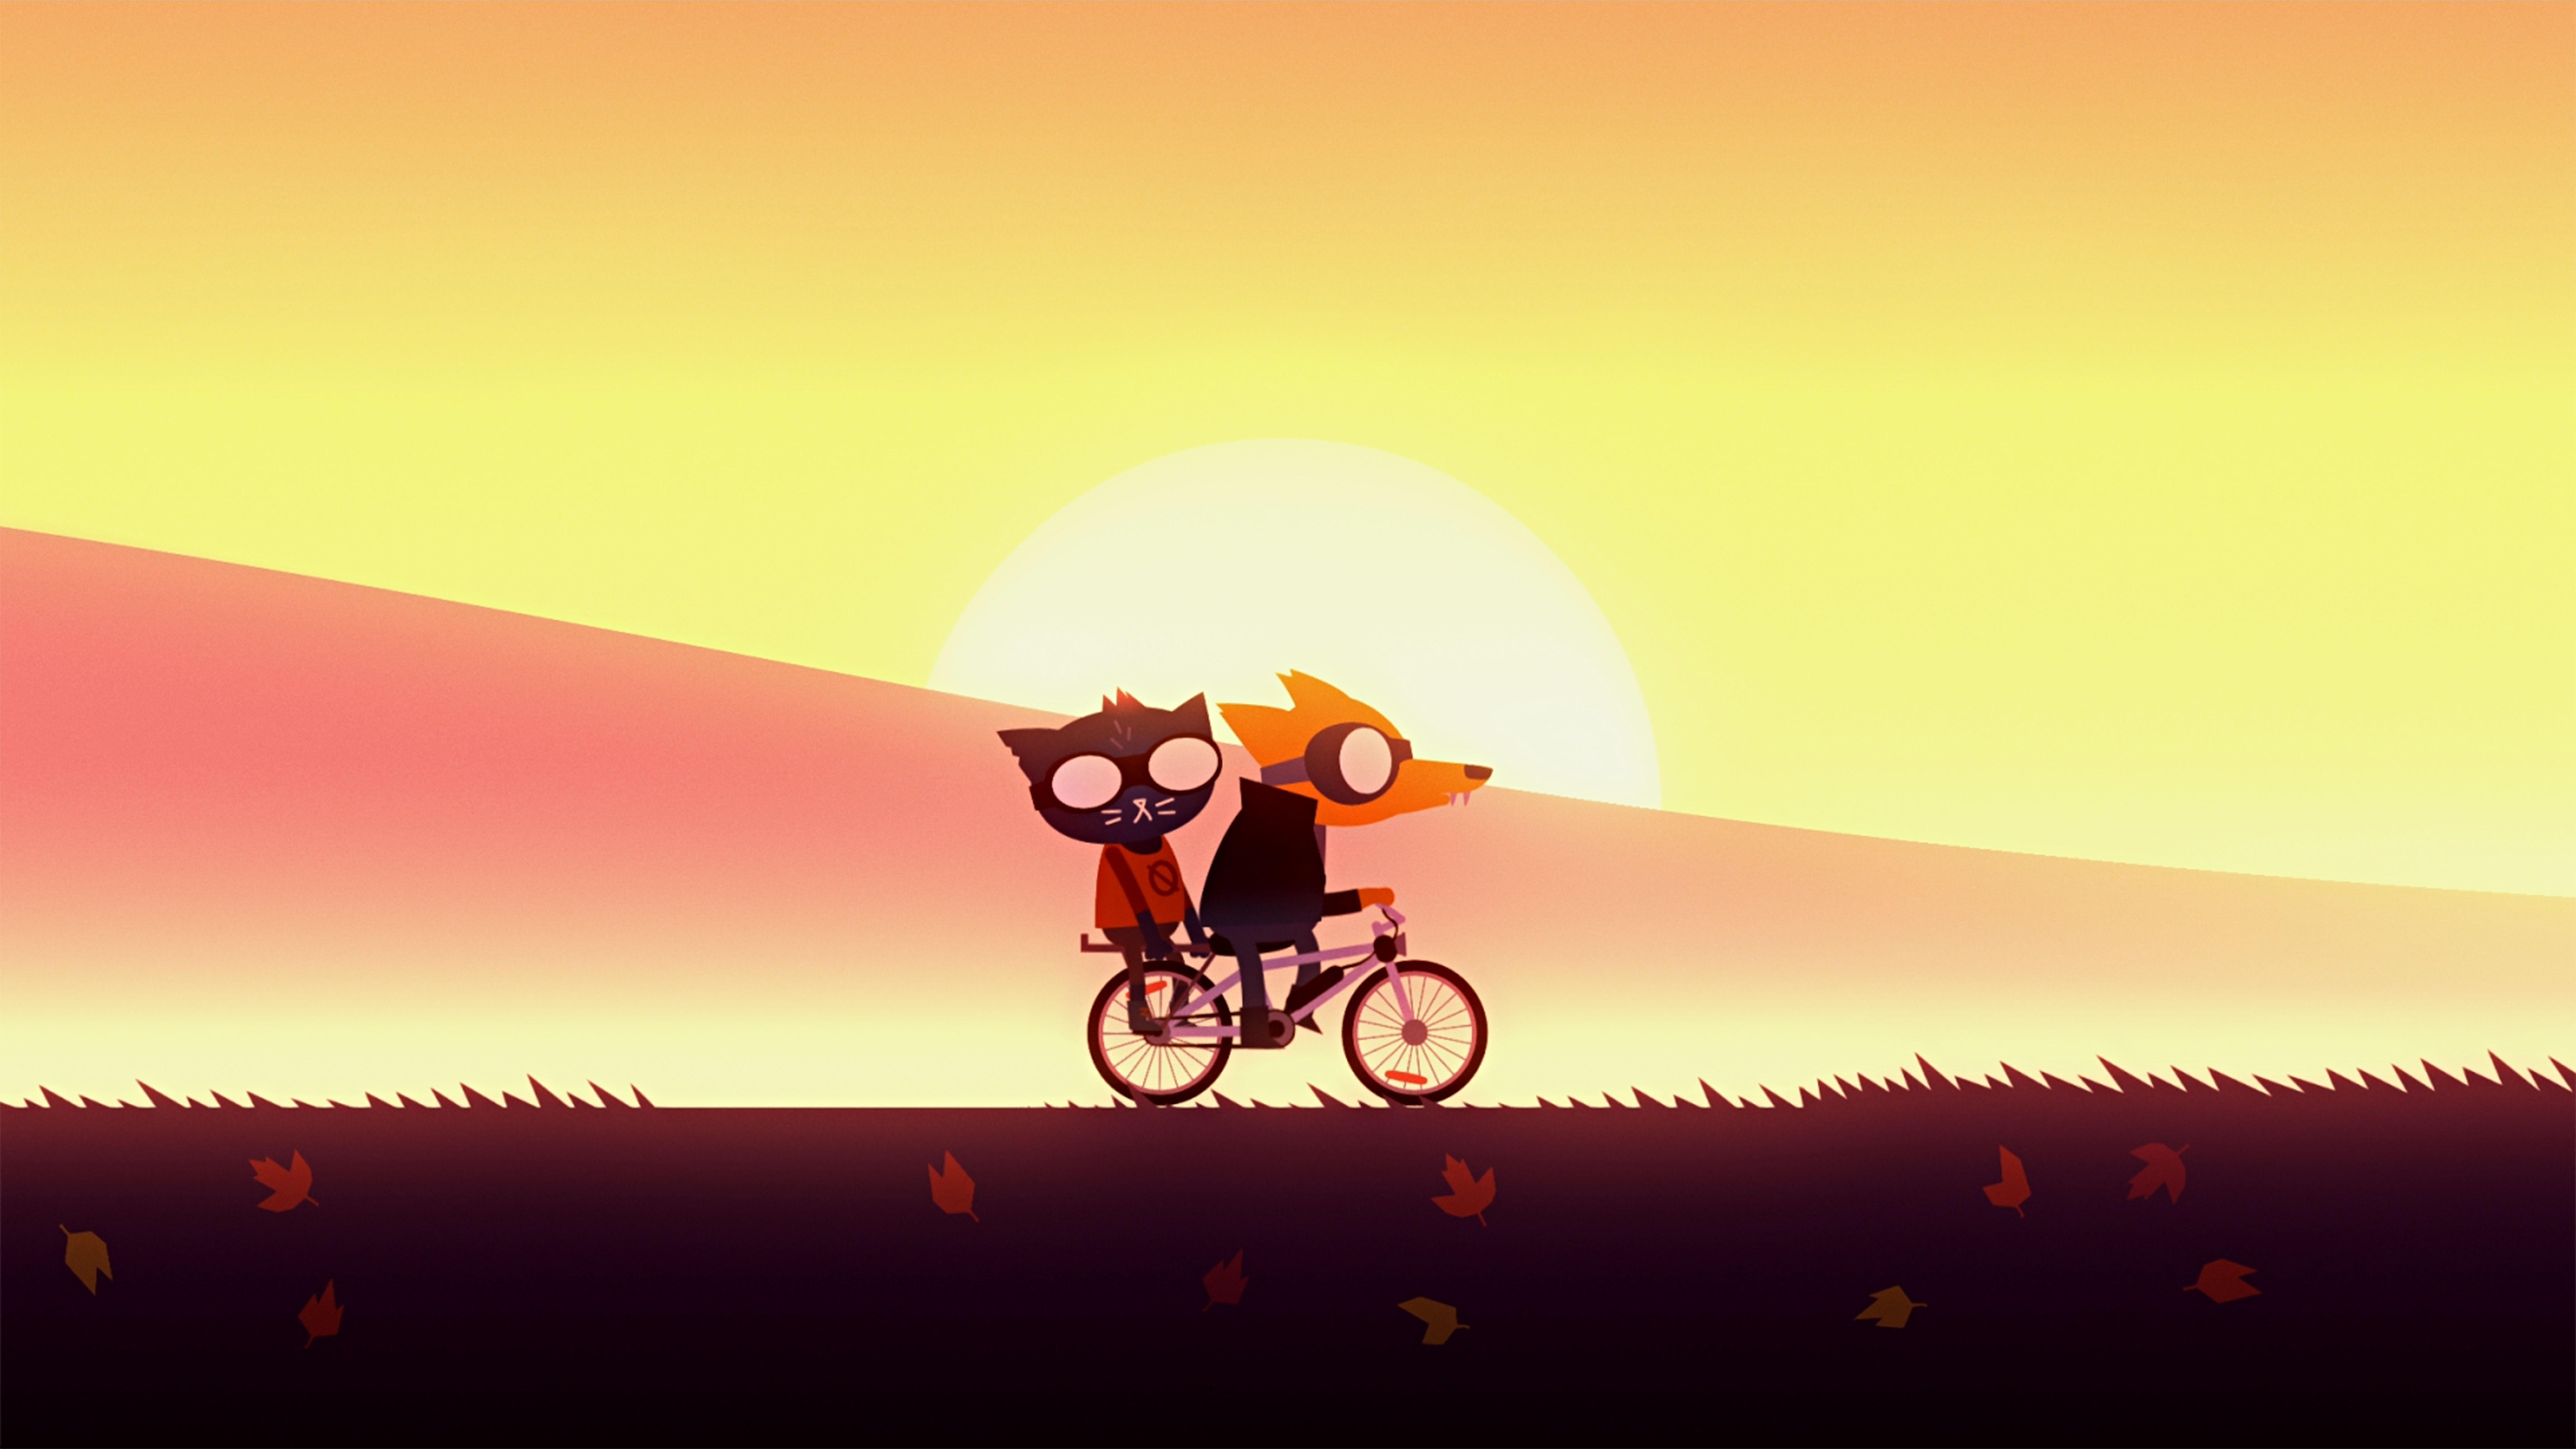 Browse thousands of Nitw images for design inspiration  Dribbble